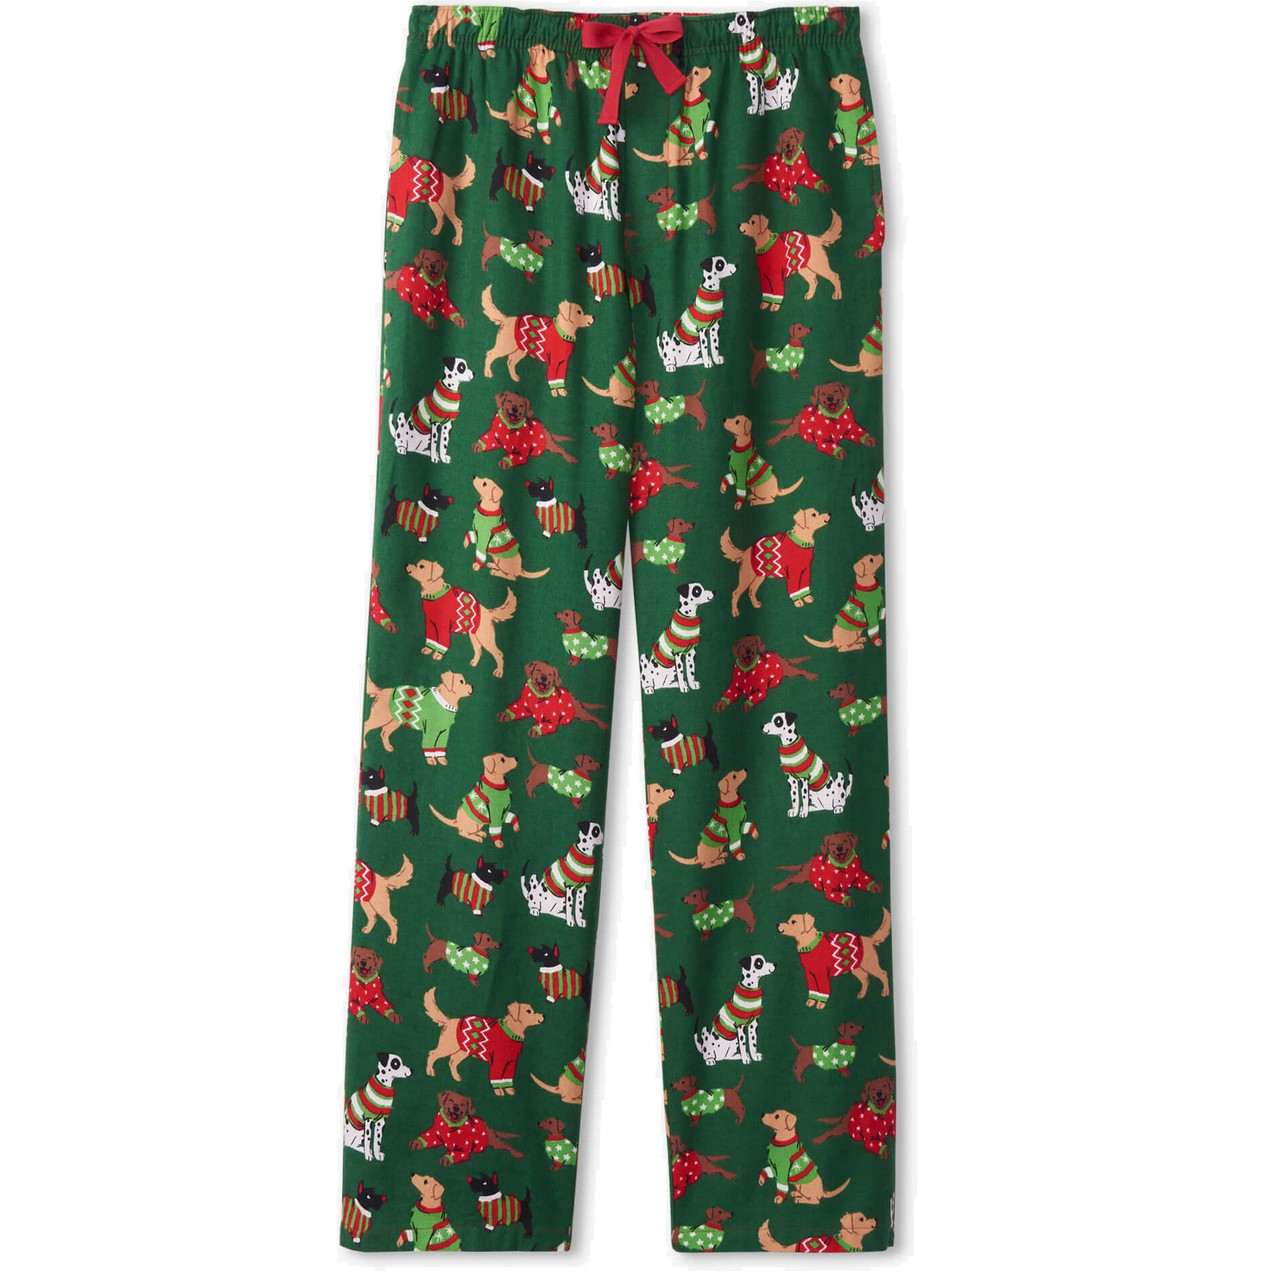 https://cdn11.bigcommerce.com/s-c9a80/images/stencil/1280x1280/products/11905/39439/Woofin_Christmas_Mens_Pajama_Pants__43974.1635099302.jpg?c=2